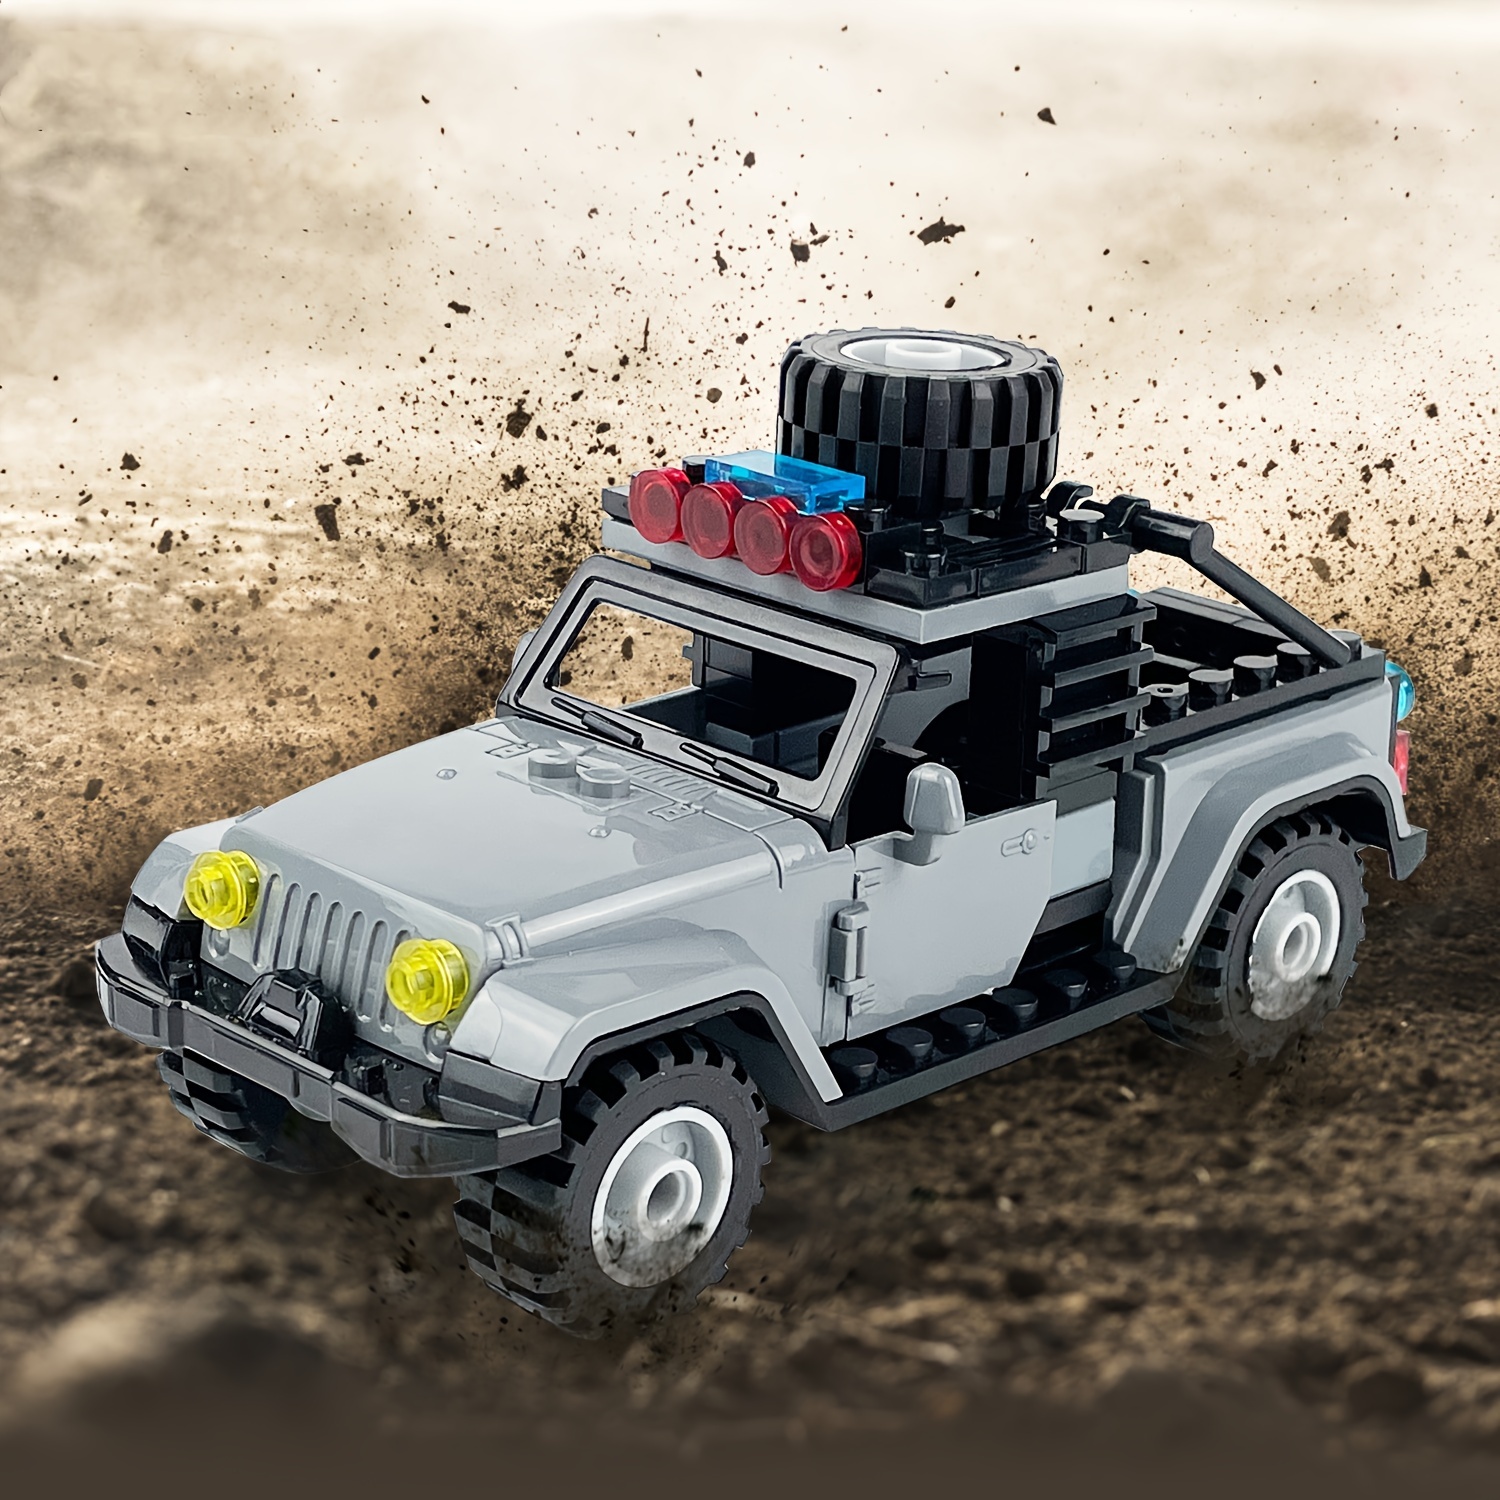 Customise your own Off-Road